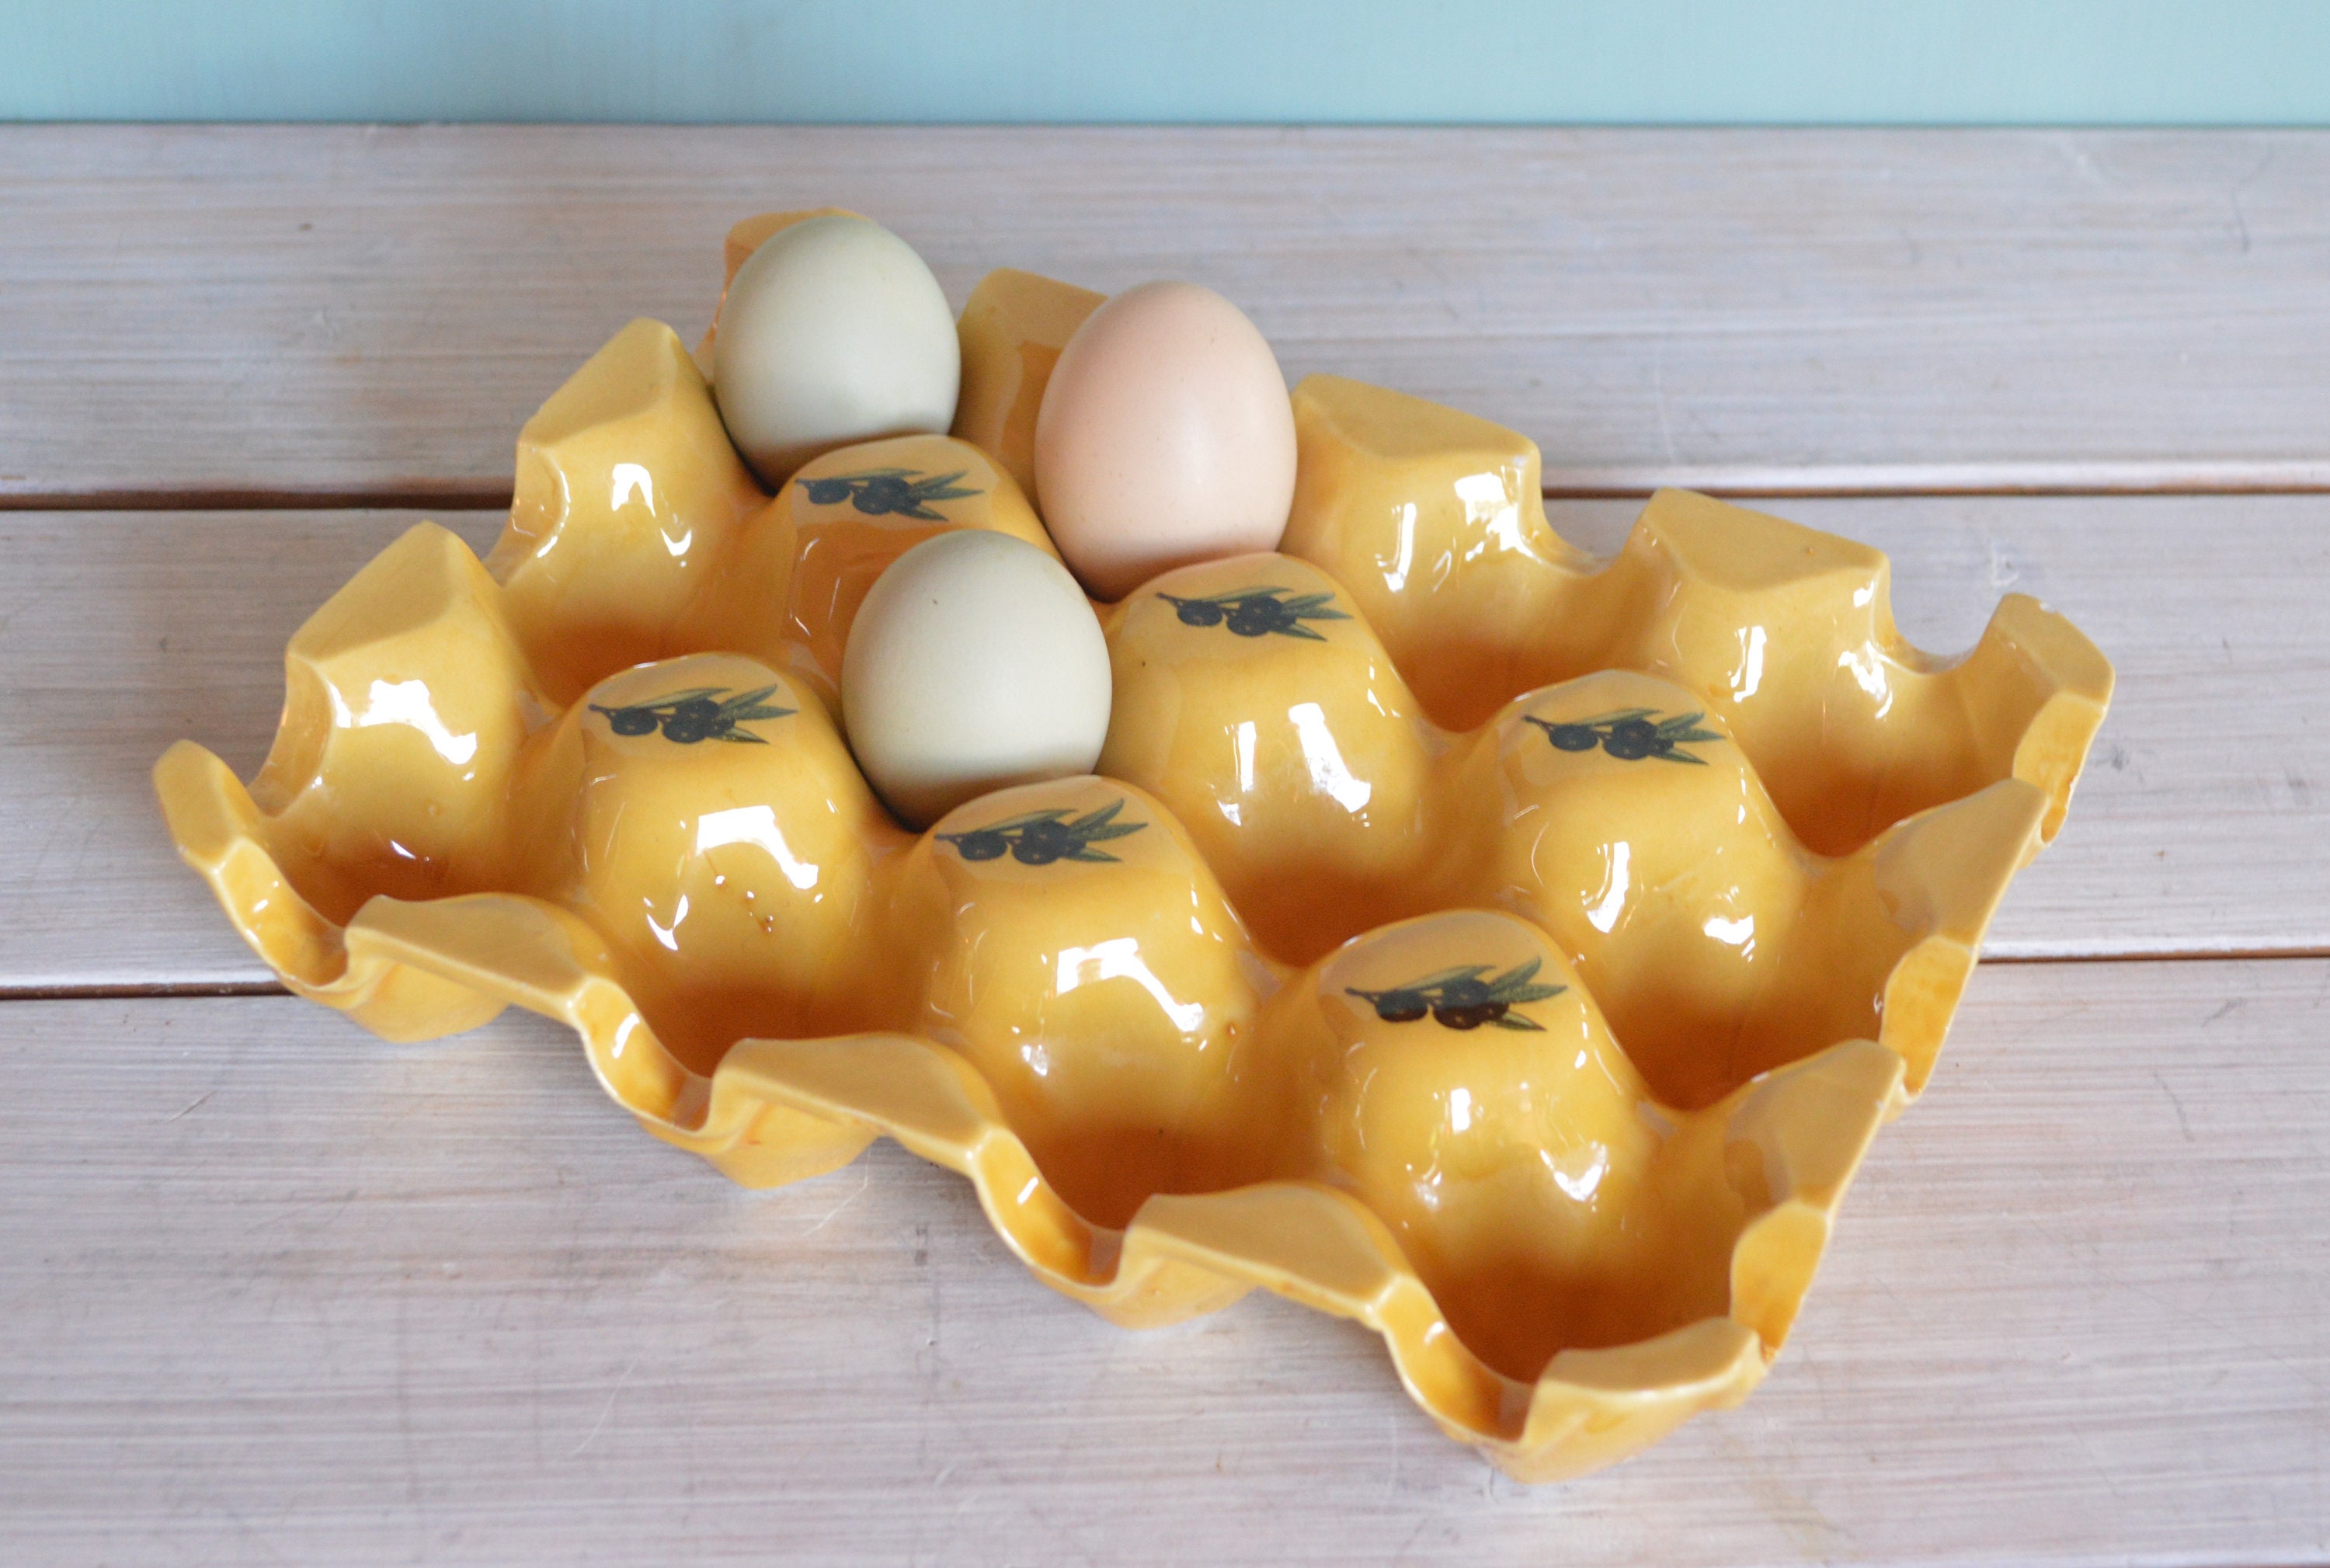 Downton Abbey Inspired Wooden Stackable Countertop Egg Holder 